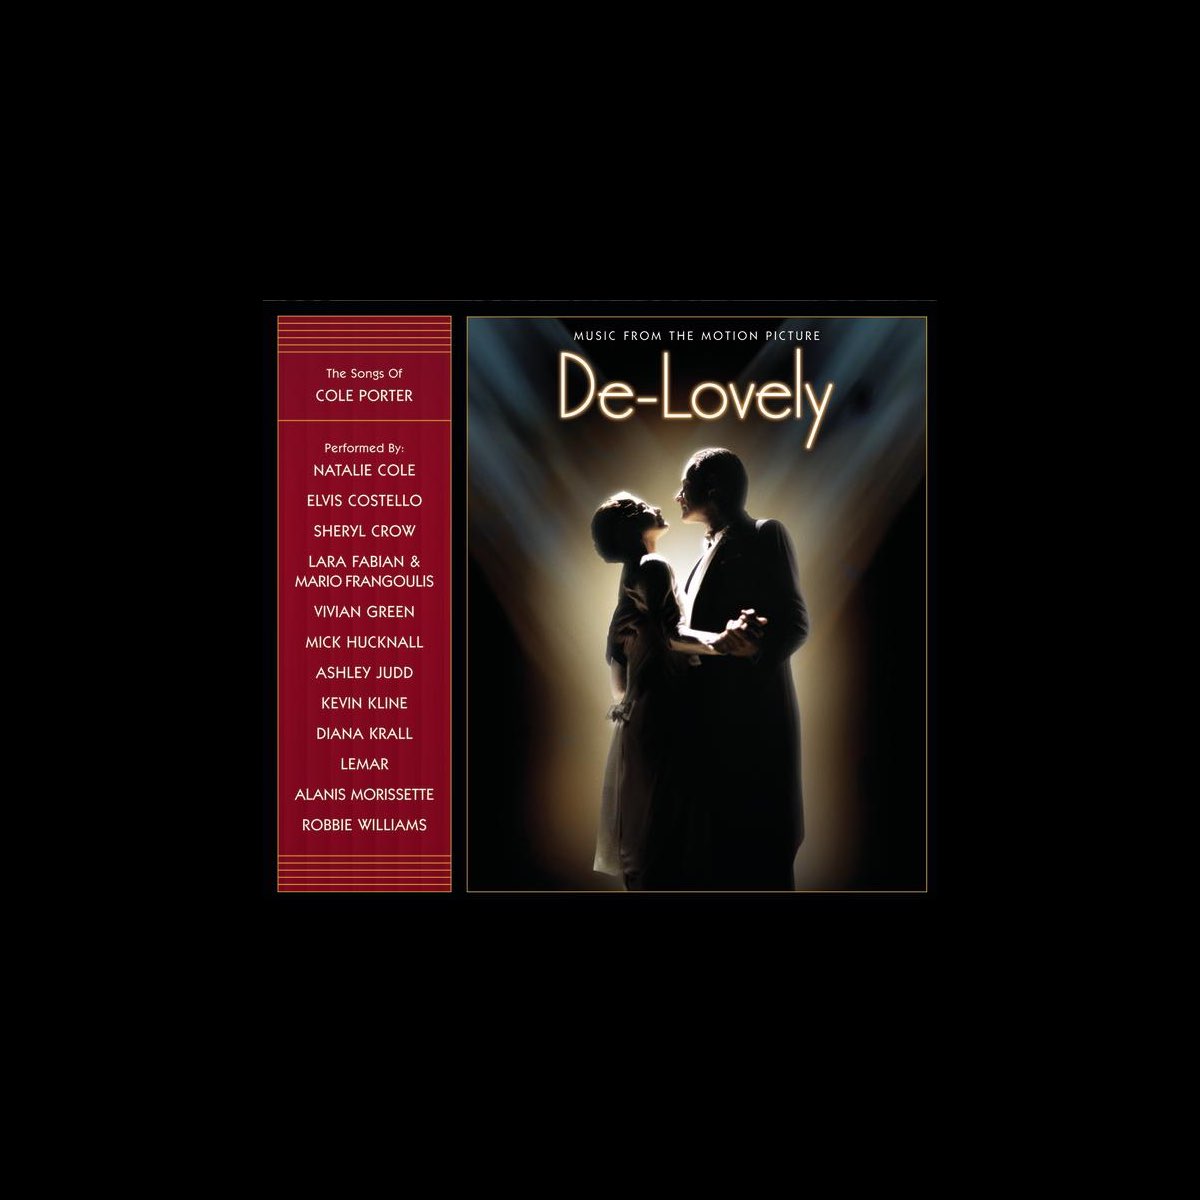 De Lovely Music From The Motion Picture By Various Artists On Apple Music